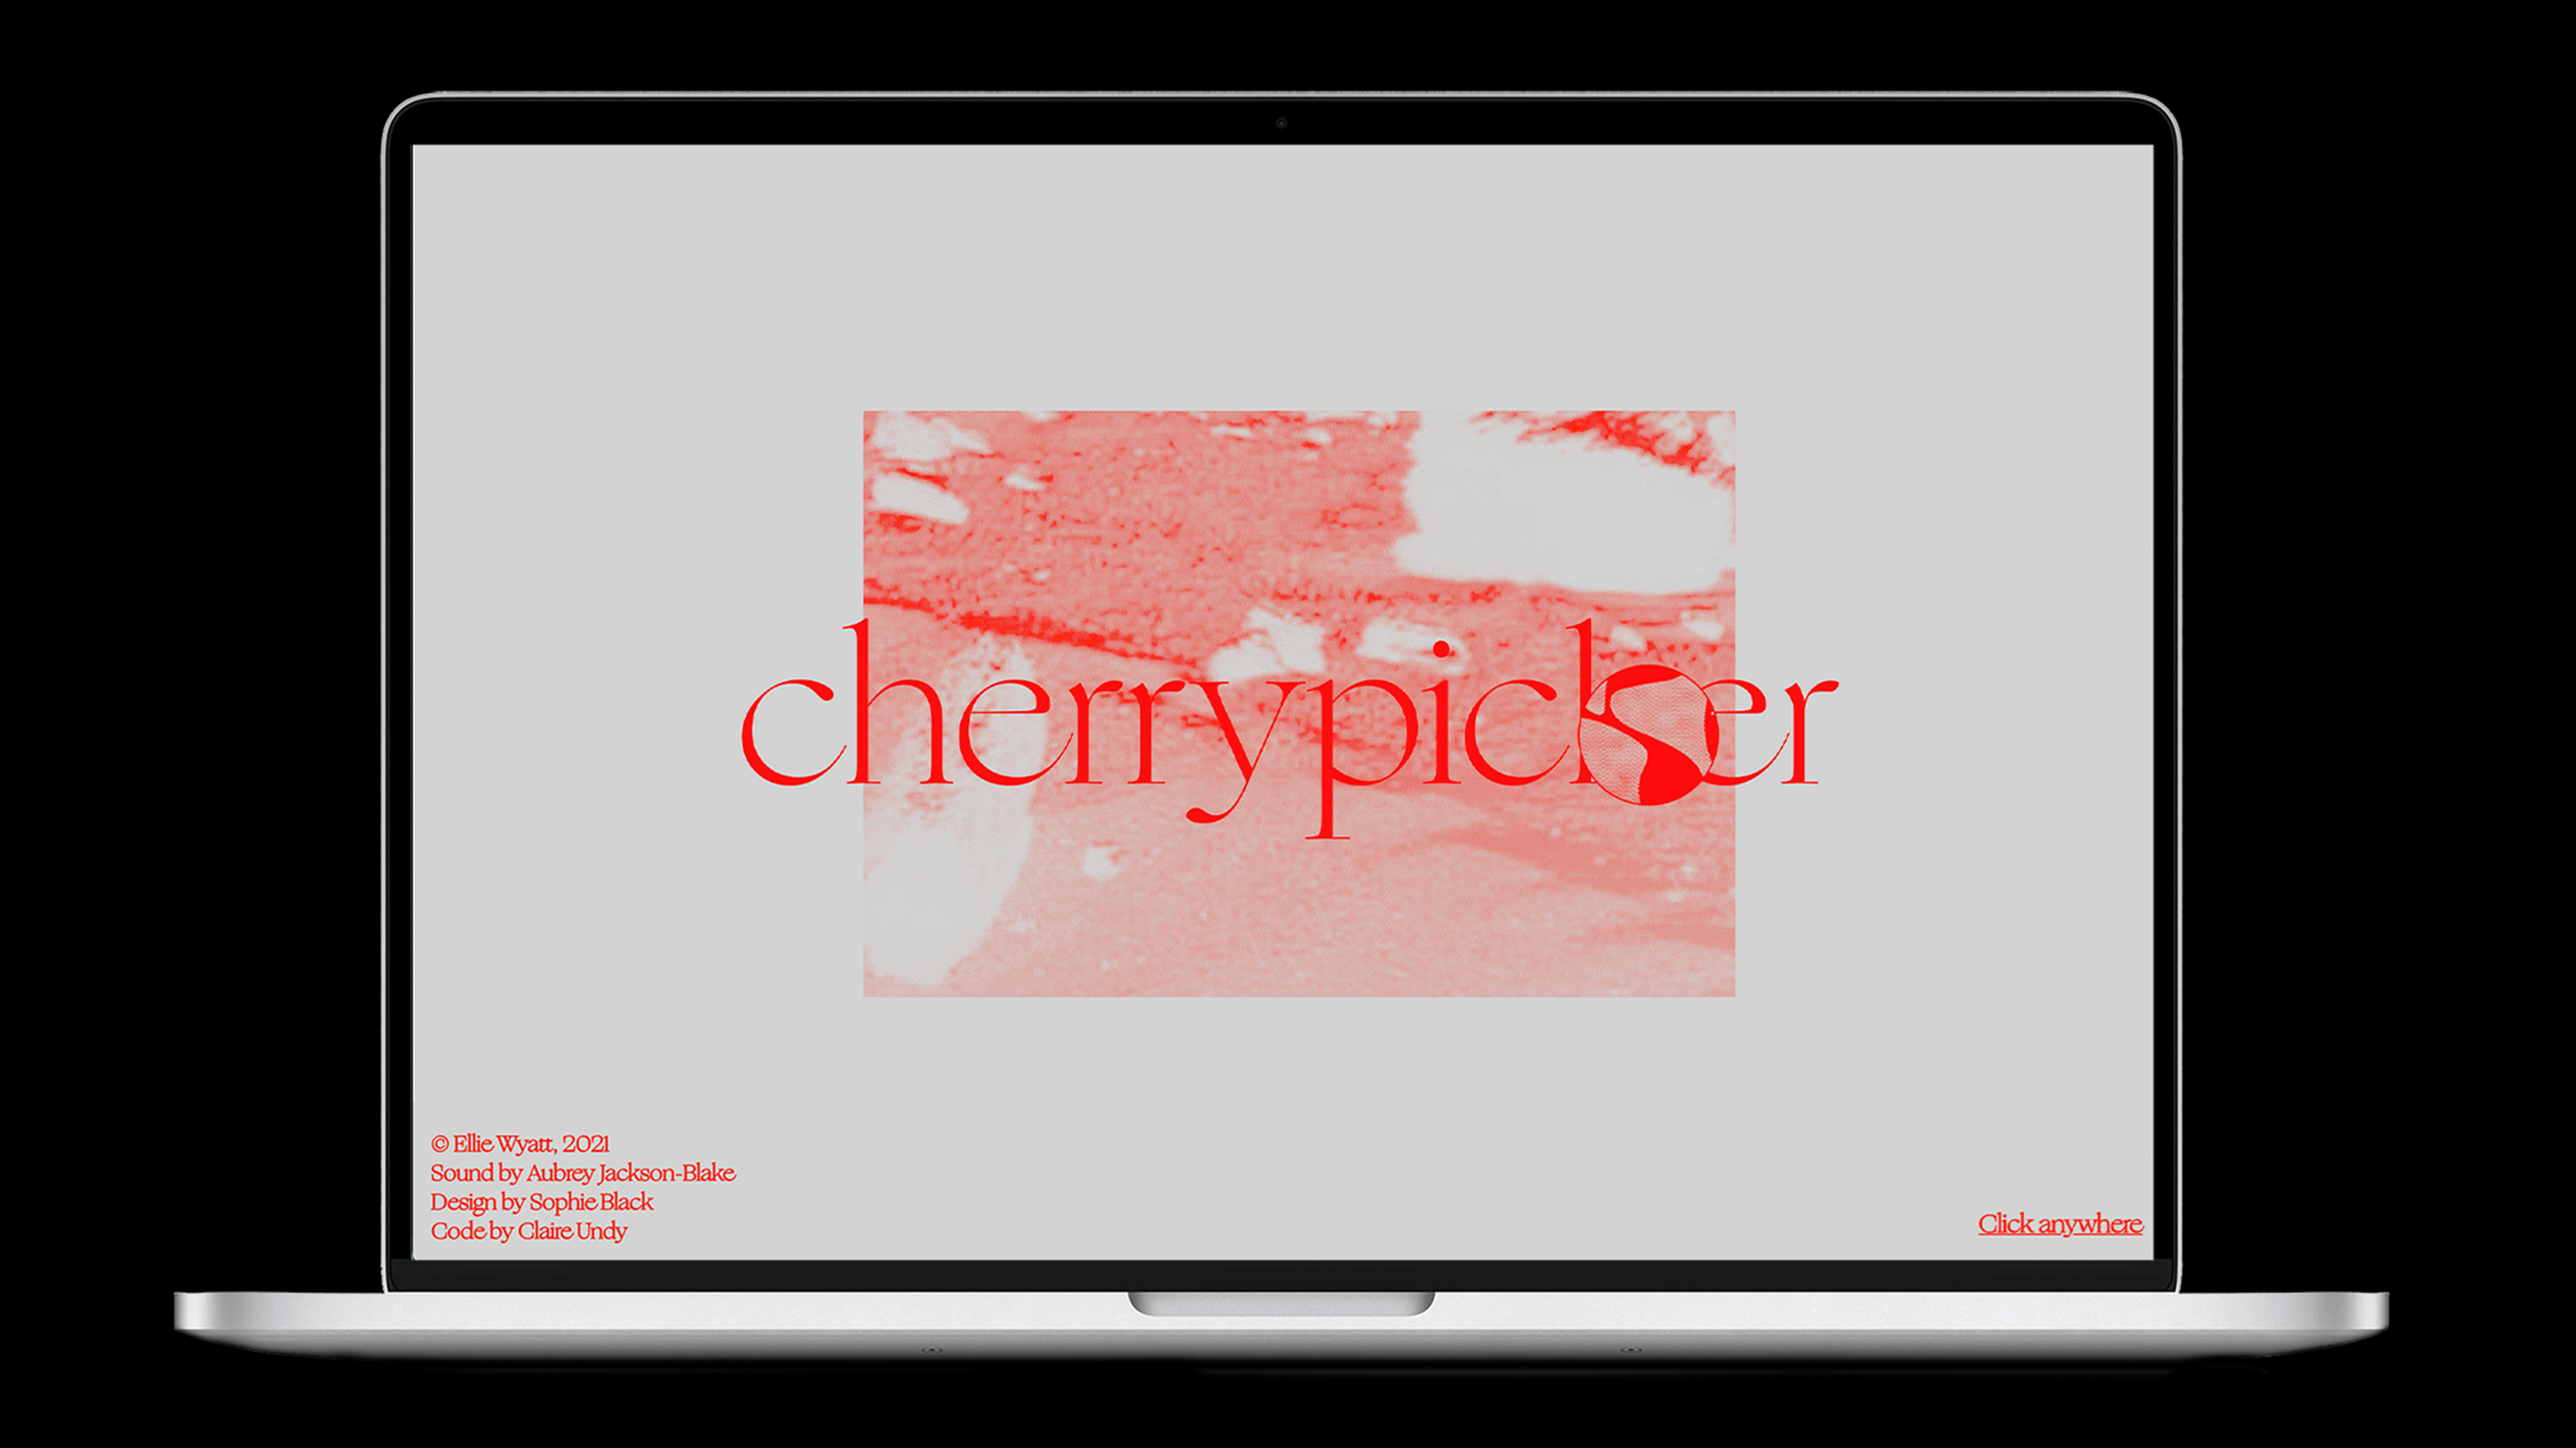 cherrypicker§online moving image work, 2021. <br>Custom website designed by Sophie Back with coding by Claire Undy and Victor Hwang, sound design by Aubrey Jackson Blake. <br> Project at http://www.cherrypicker.live/